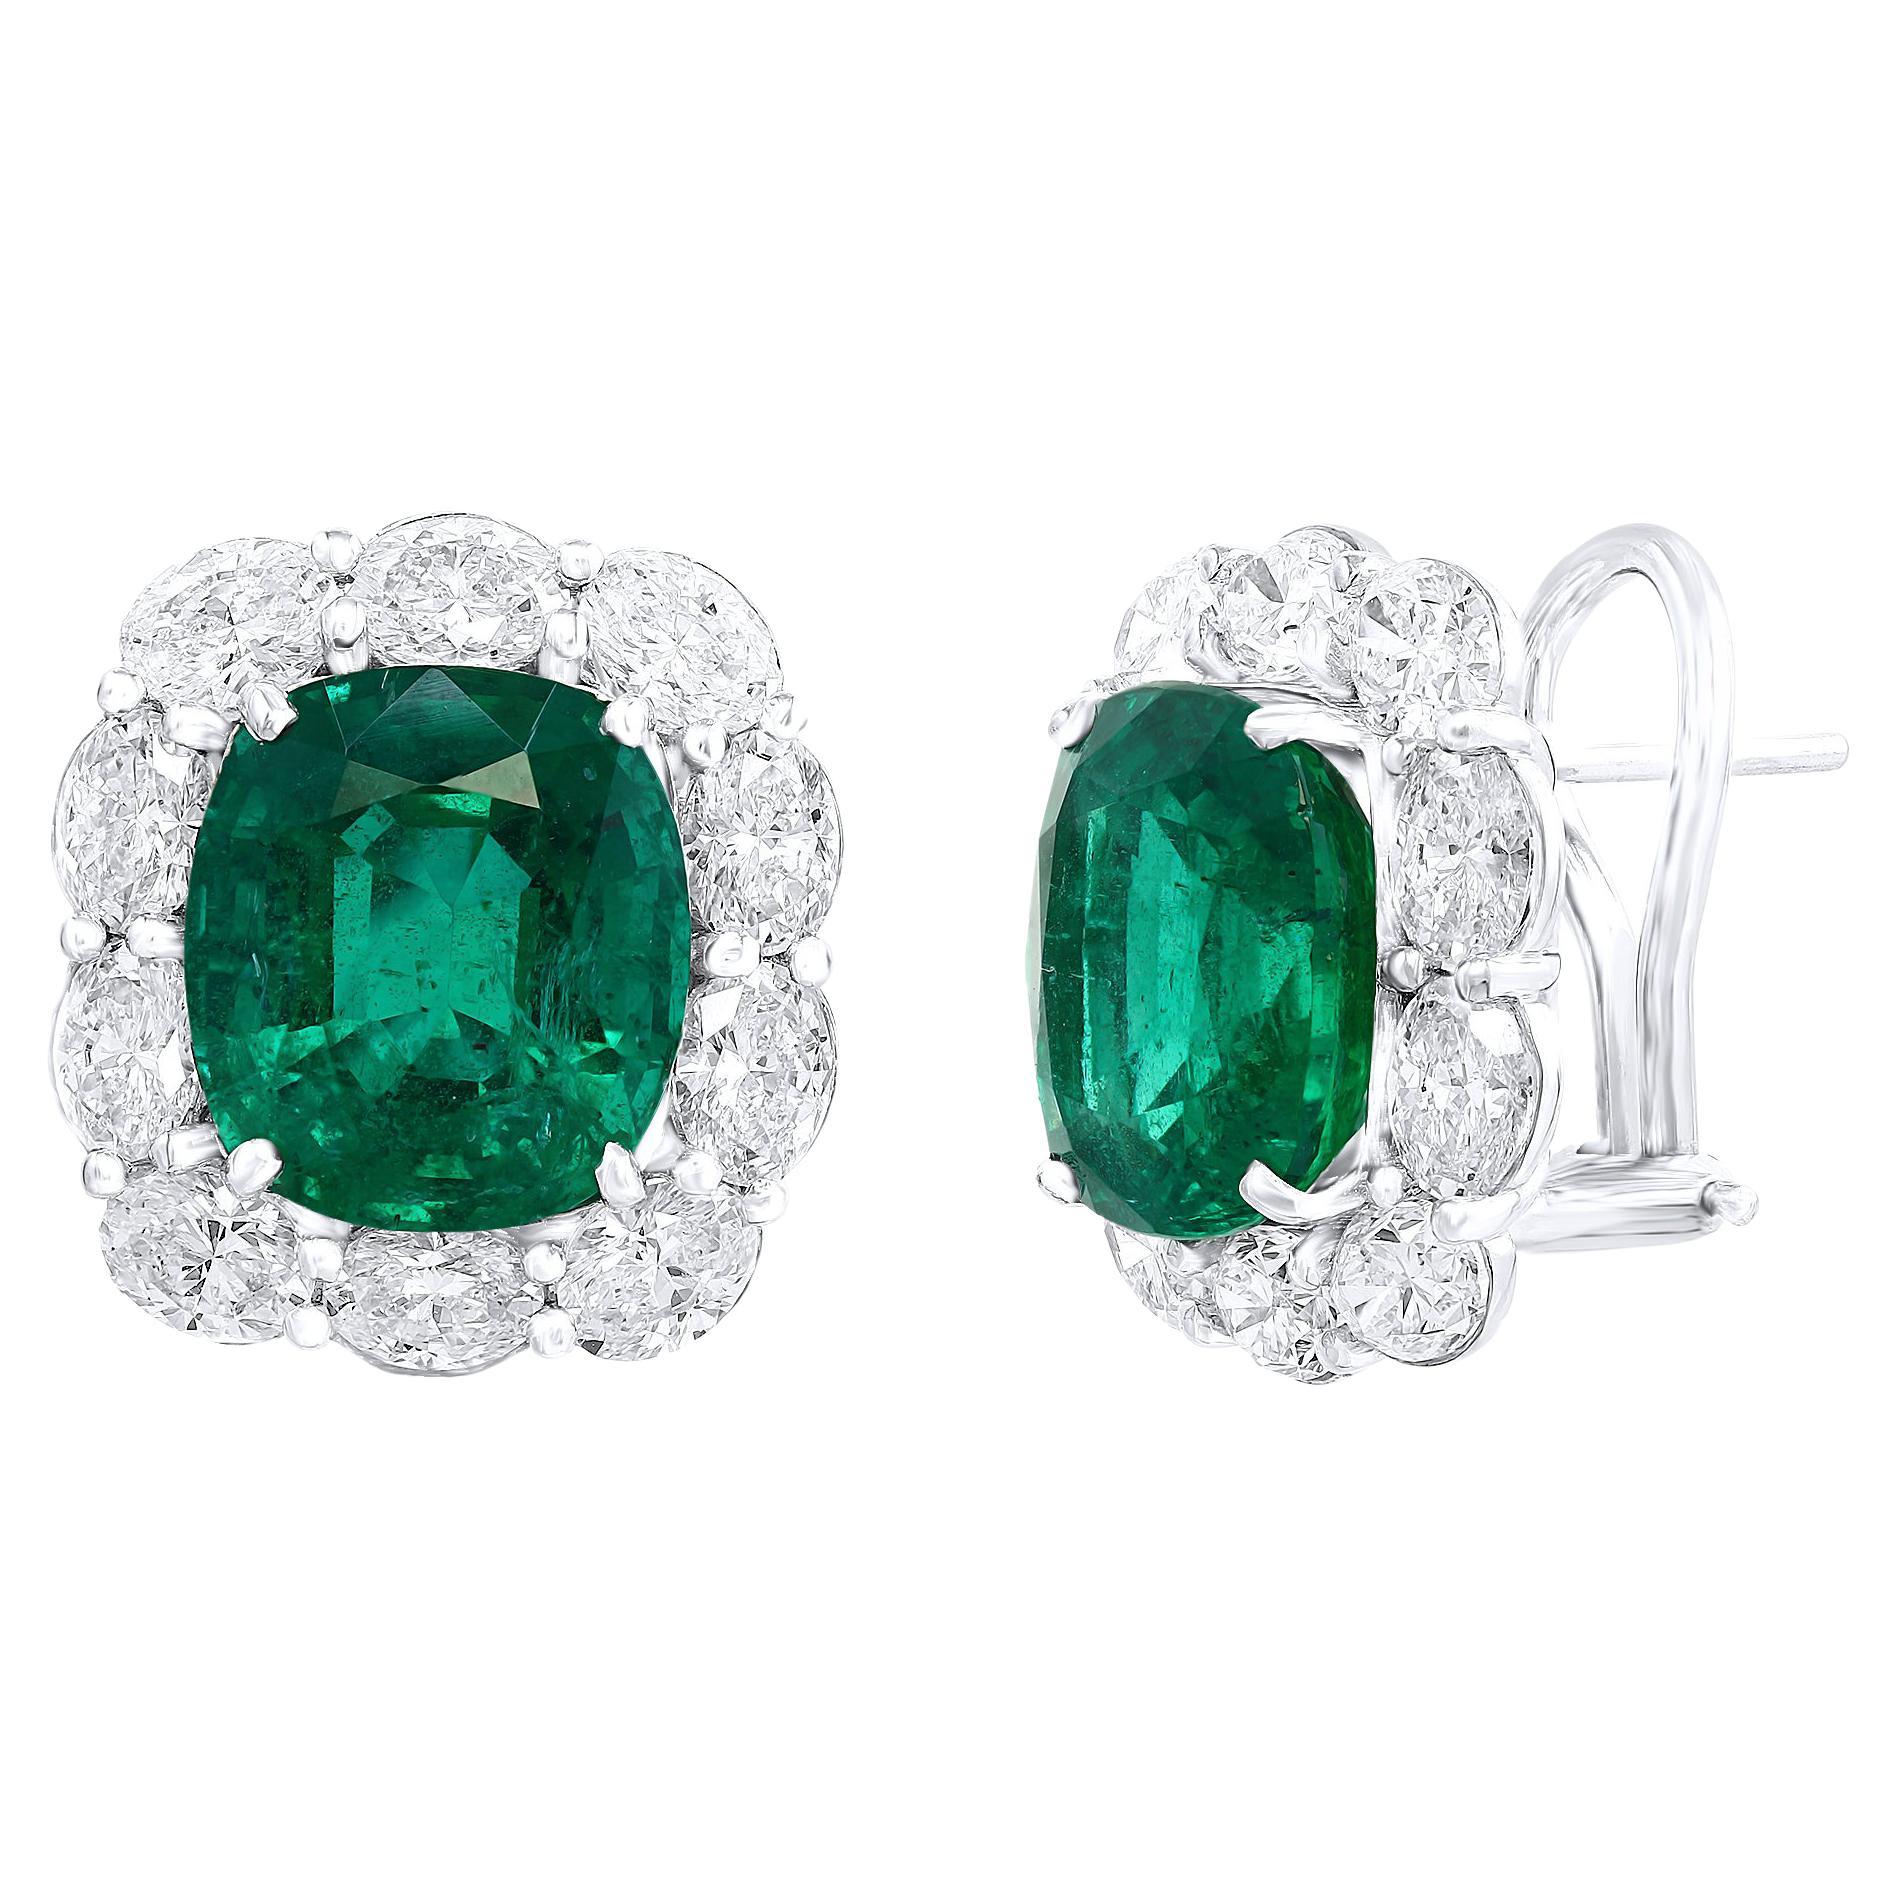 11.57 Carat Cushion Cut Emeralds and Diamond Halo Earrings in 18K White Gold For Sale